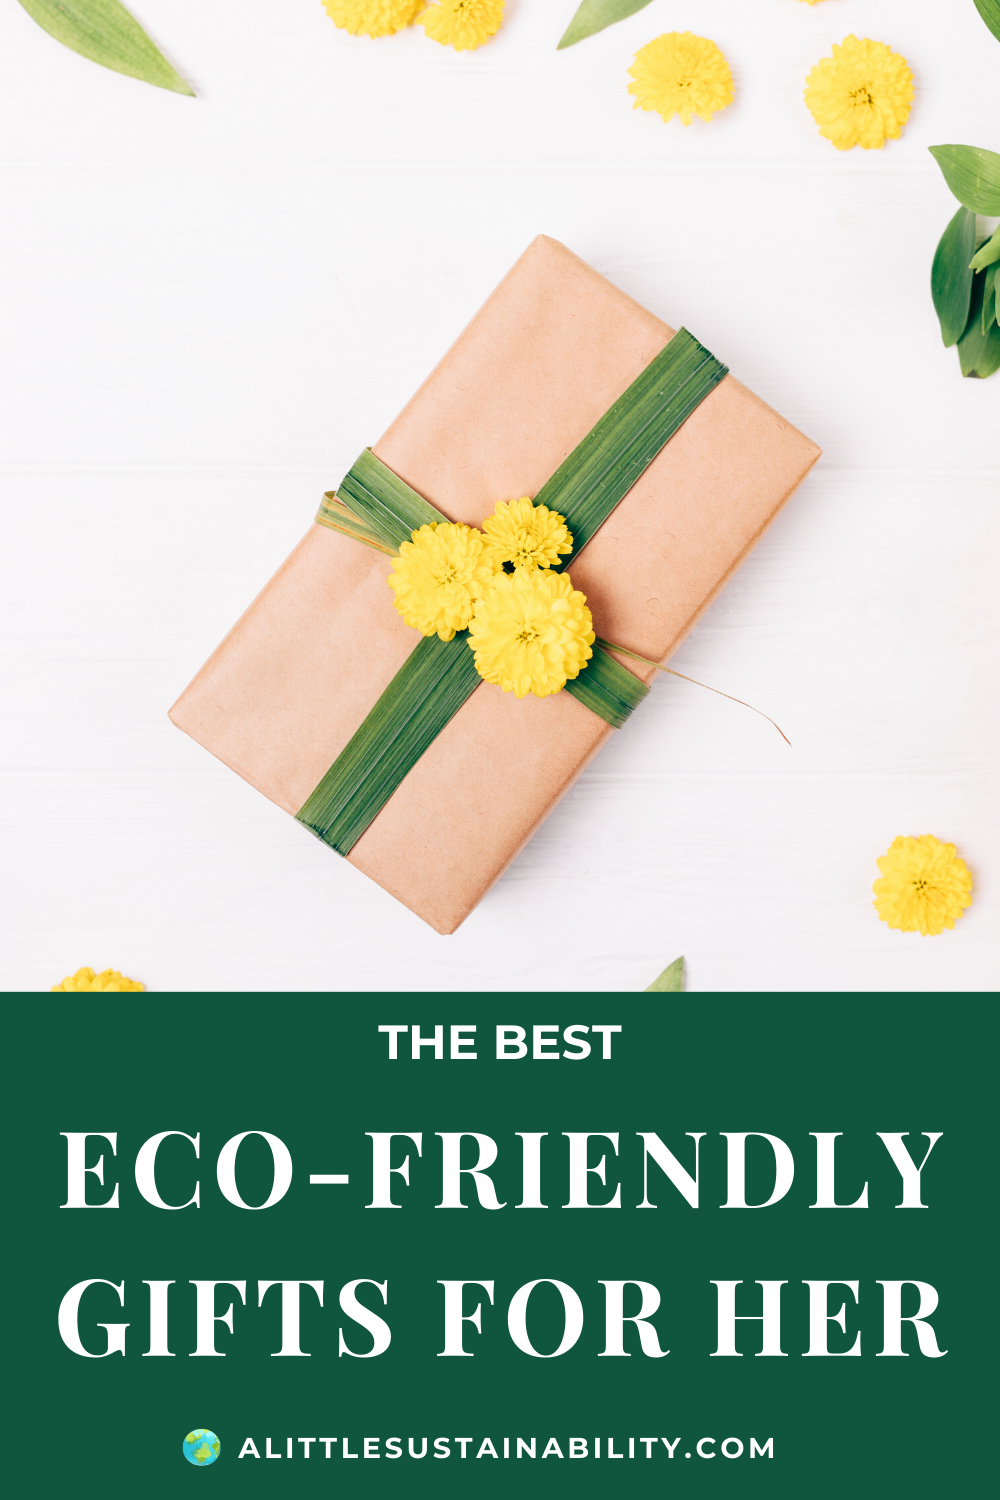 The Best Eco-Friendly Gifts for her. A curated list of eco-friendly, low waste and ethical gifts for all the women in your life. Eco-friendly gifts for her birthday, anniversary, and more